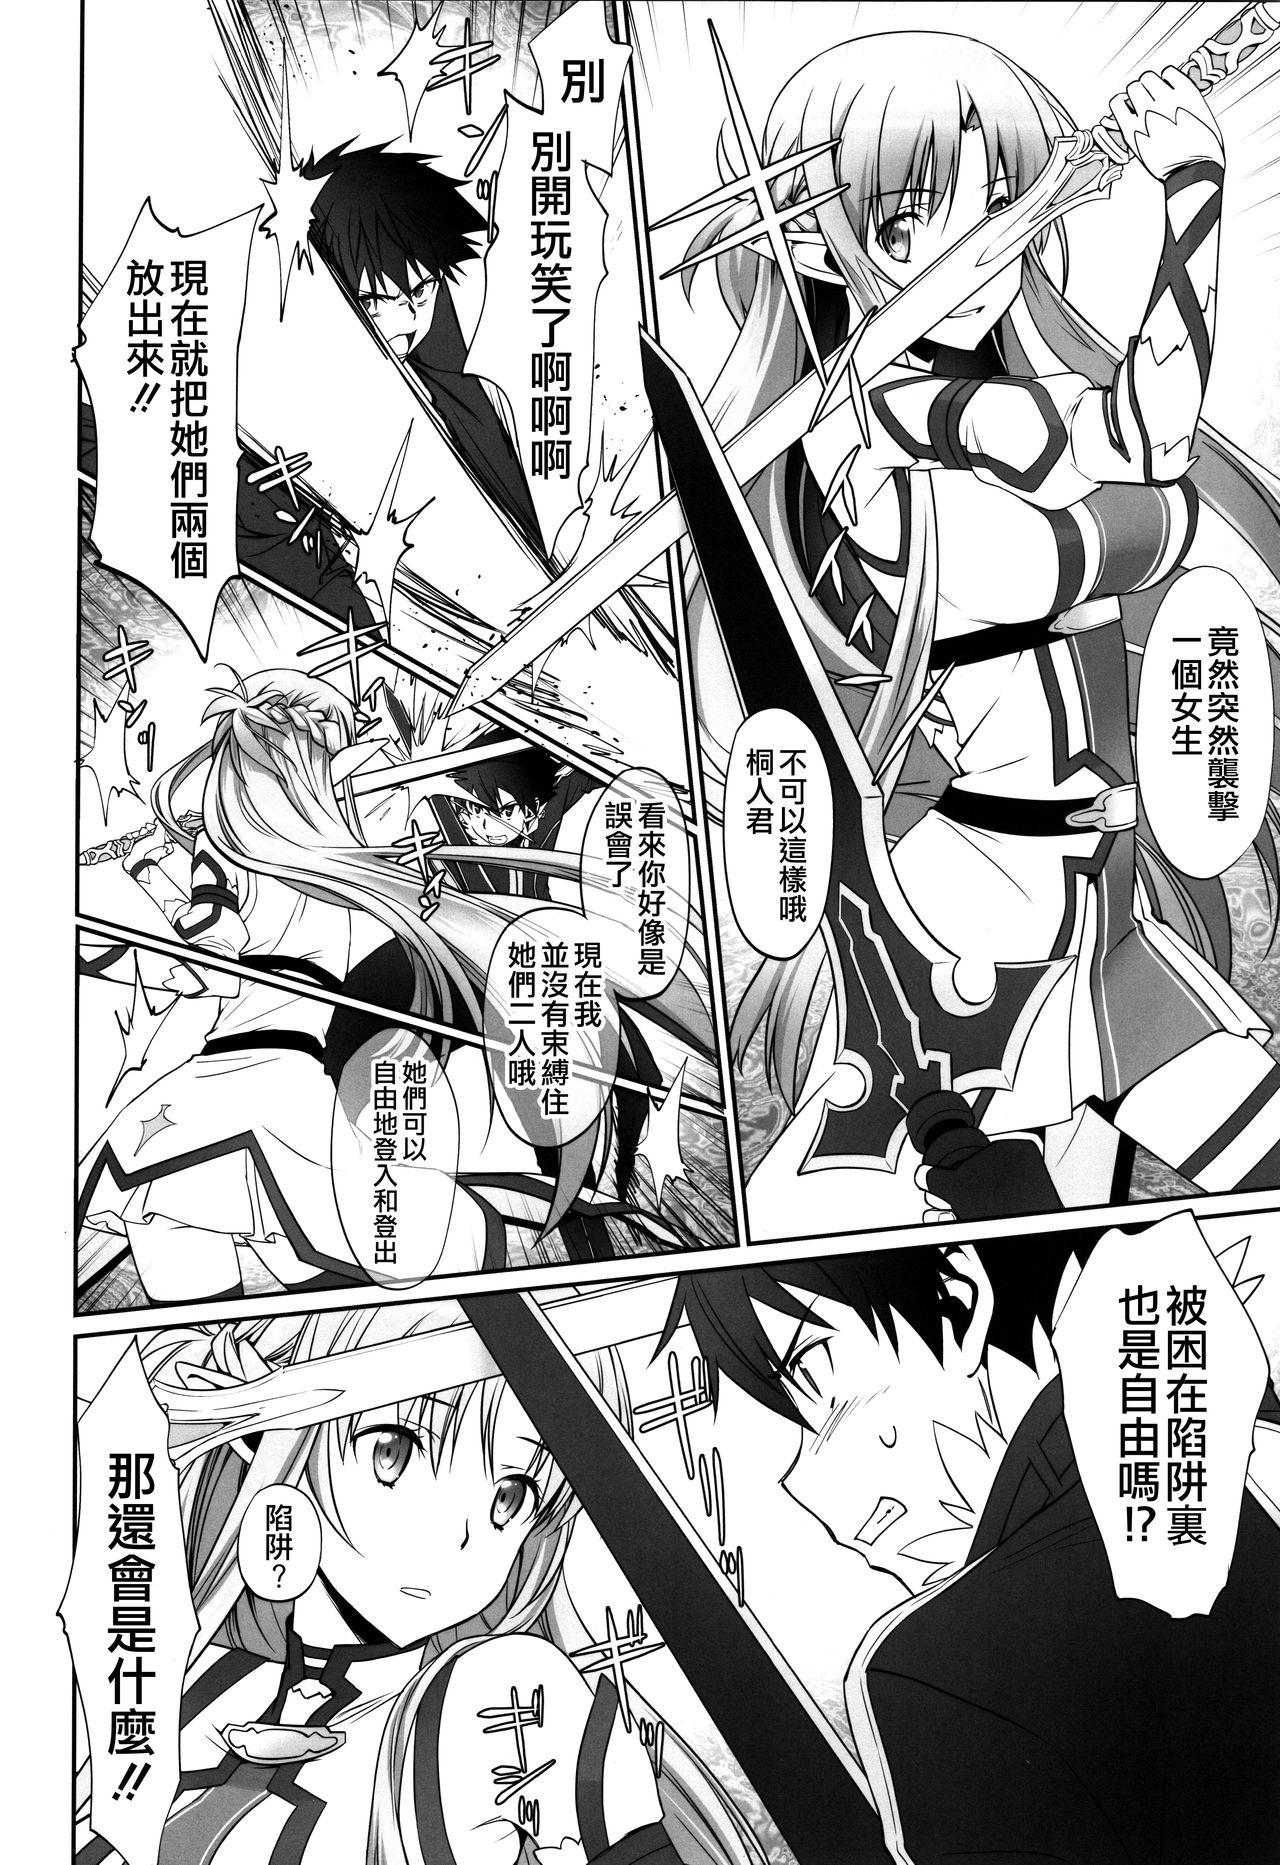 Gay Military irreversible reaction - Sword art online Good - Page 6